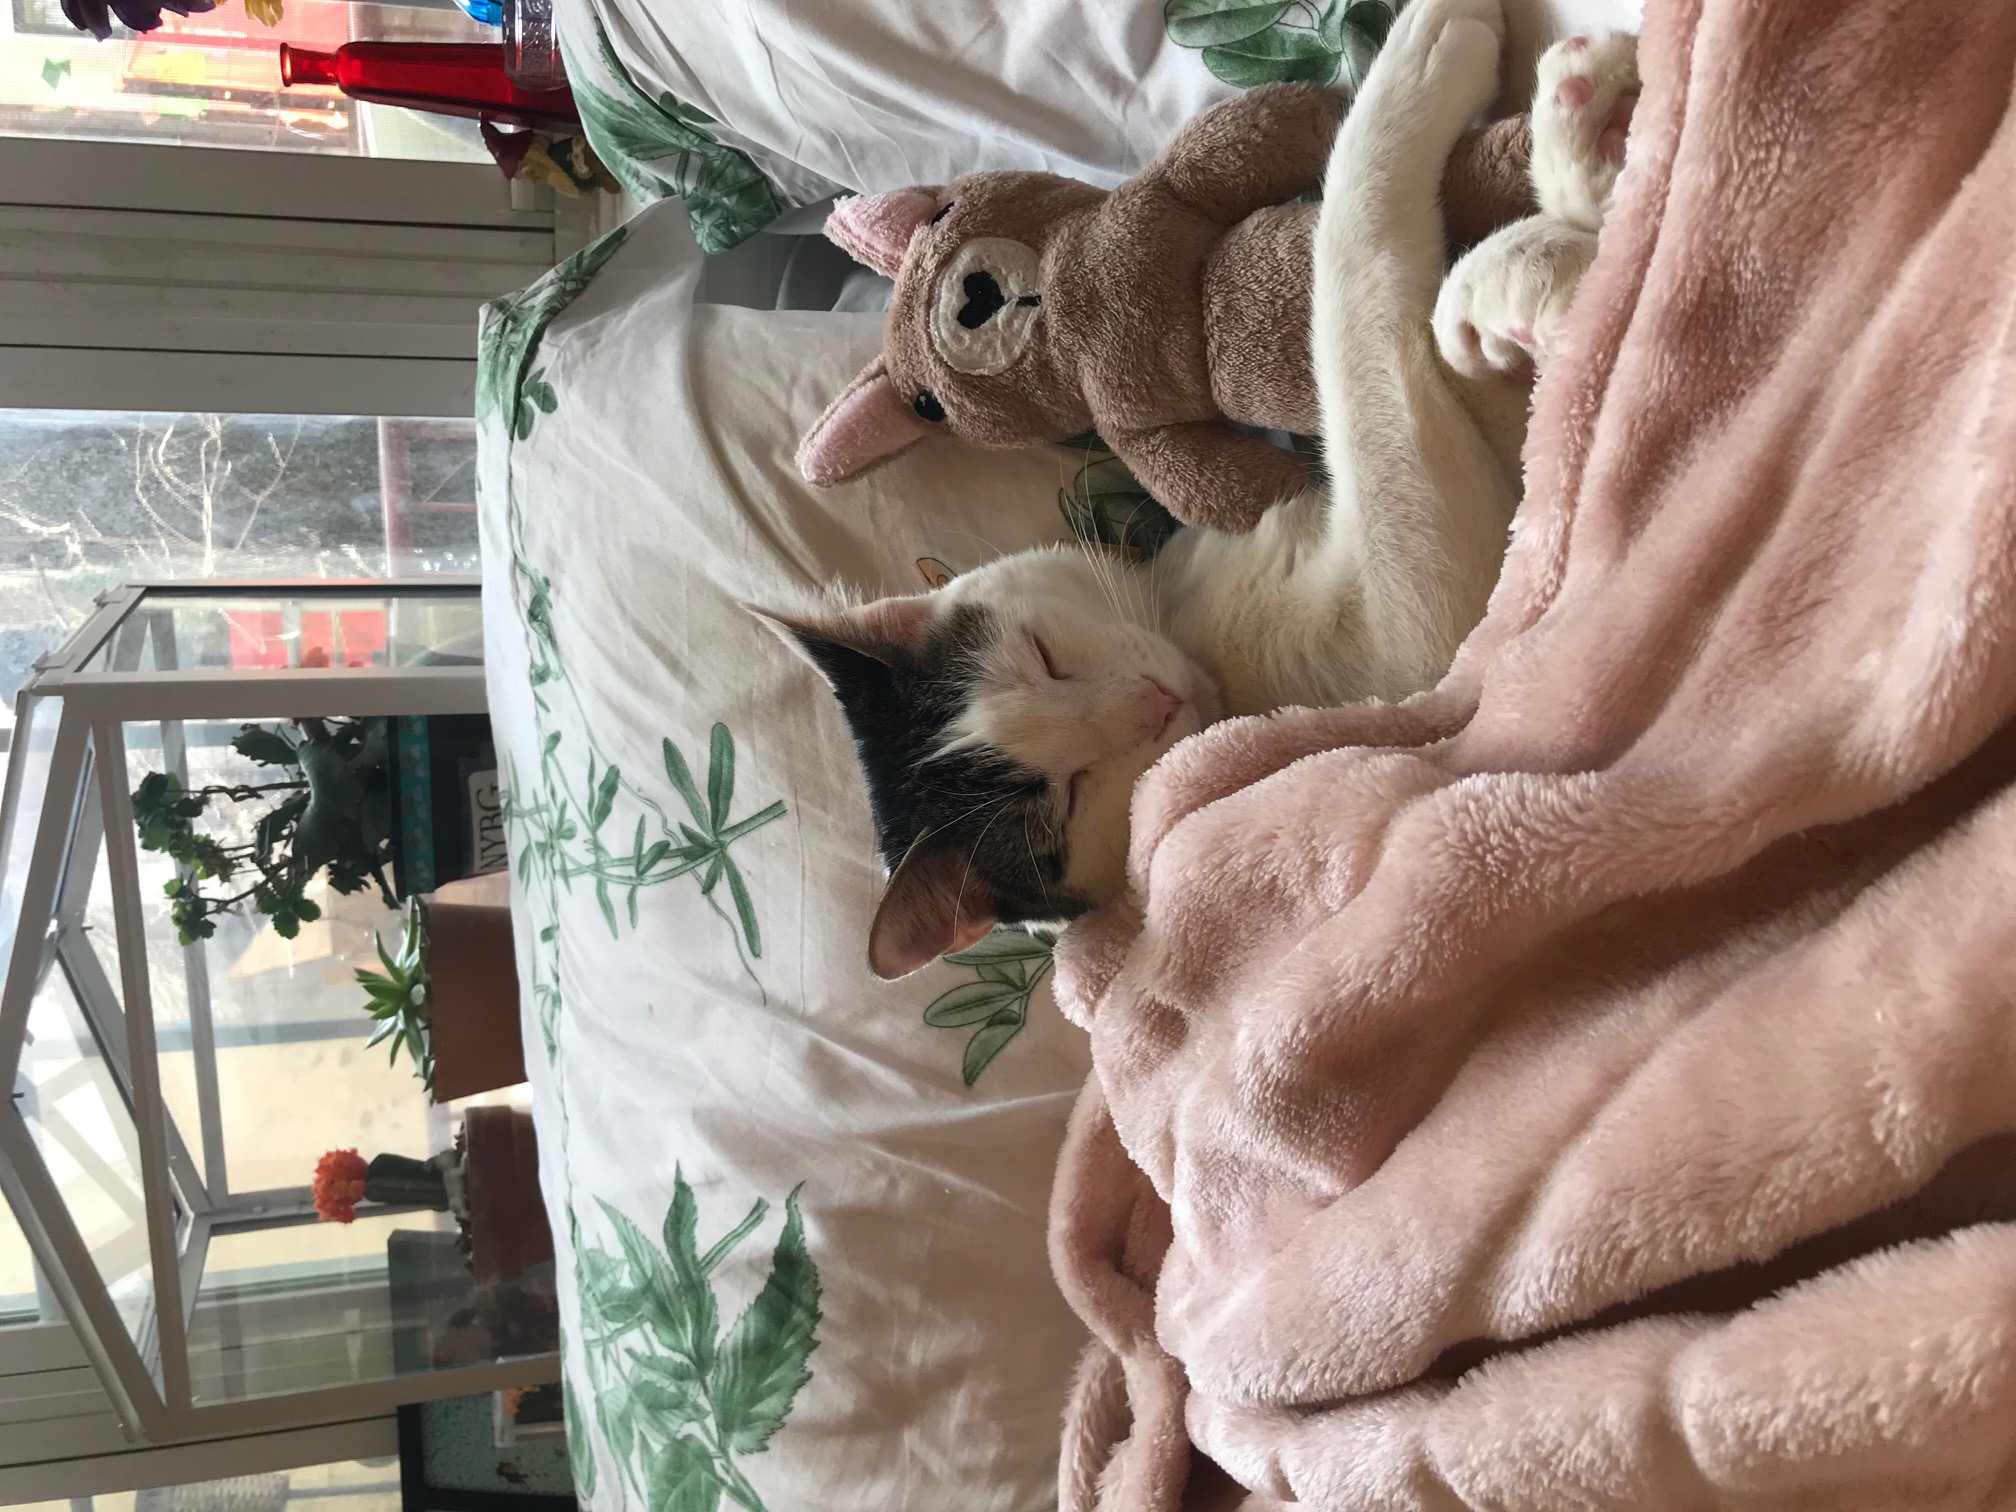 A small white cat with tabby splotches lies tucked under a pink blanket in bed snuggling a stuffed kangaroo toy.